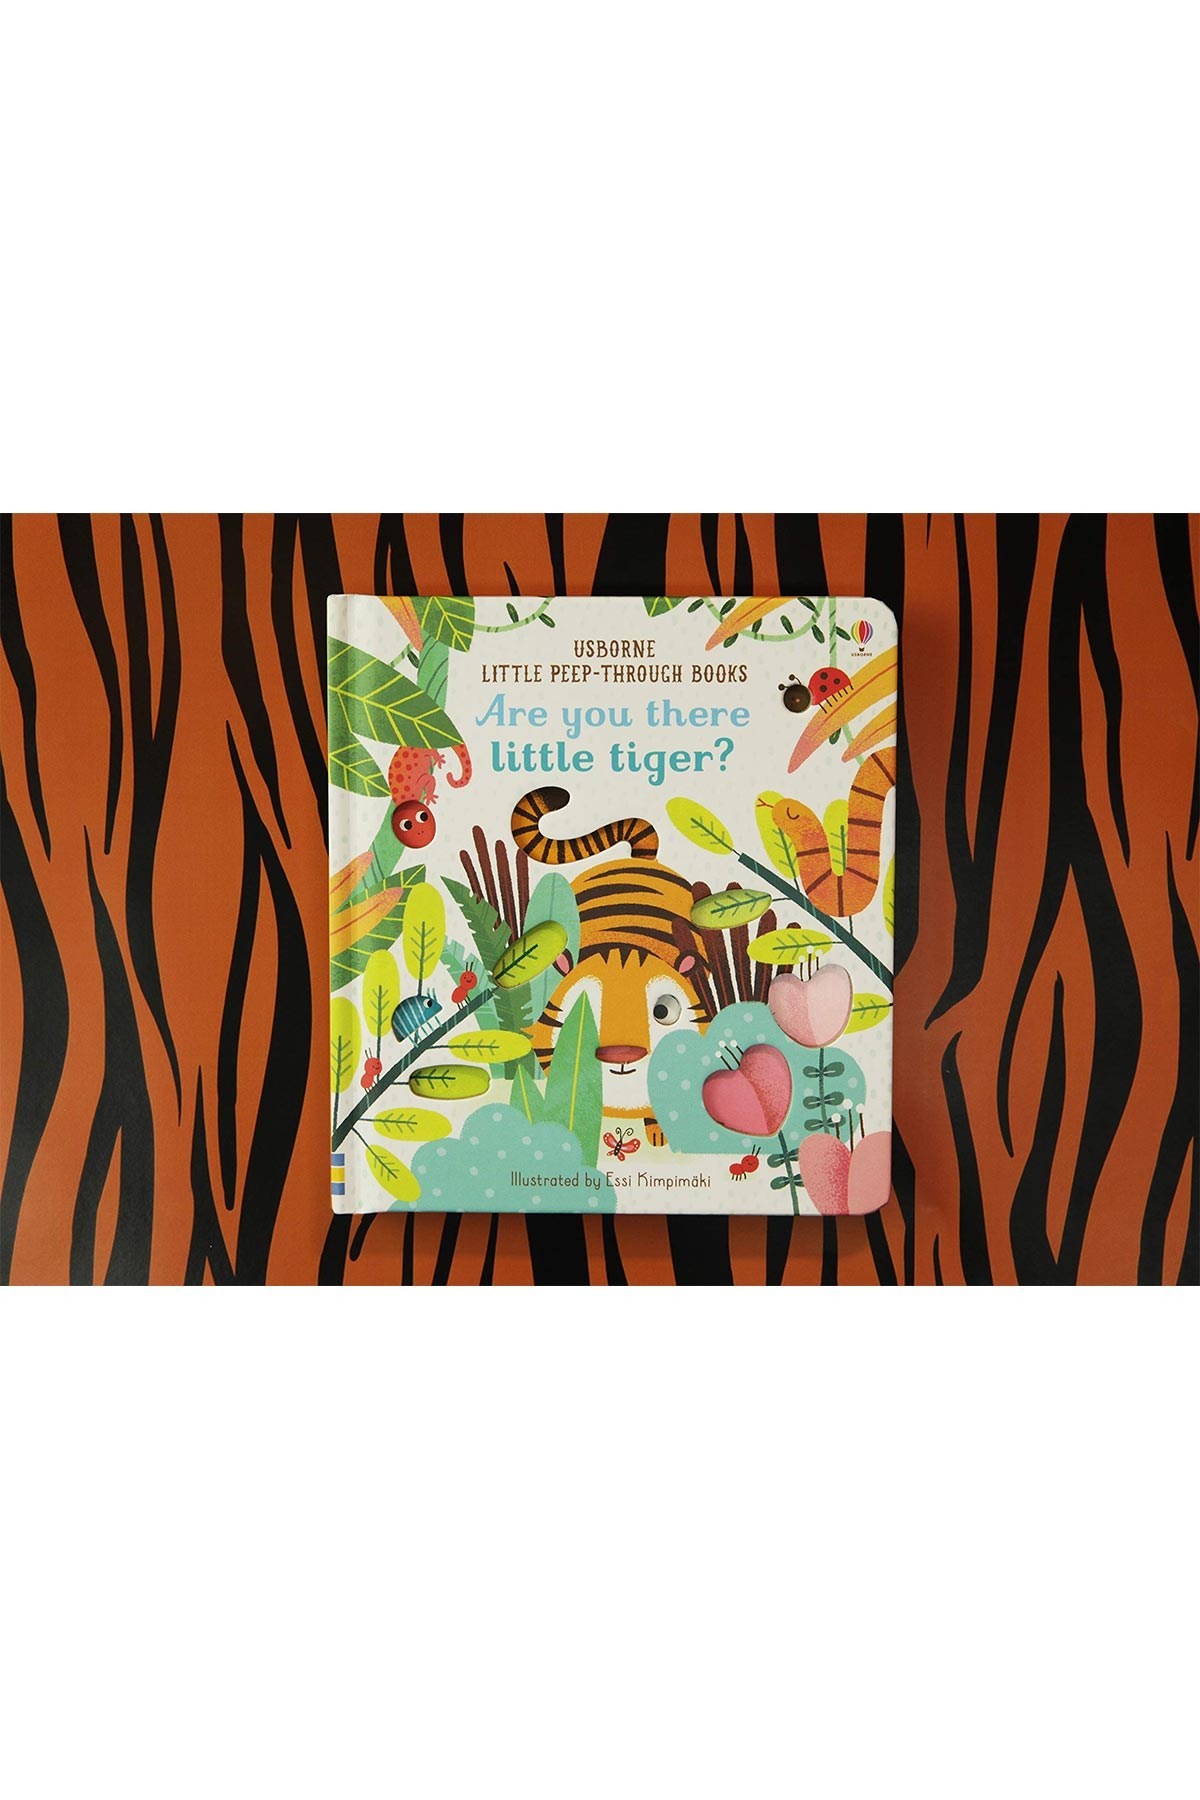 The Usborne Are You There Little Tiger?